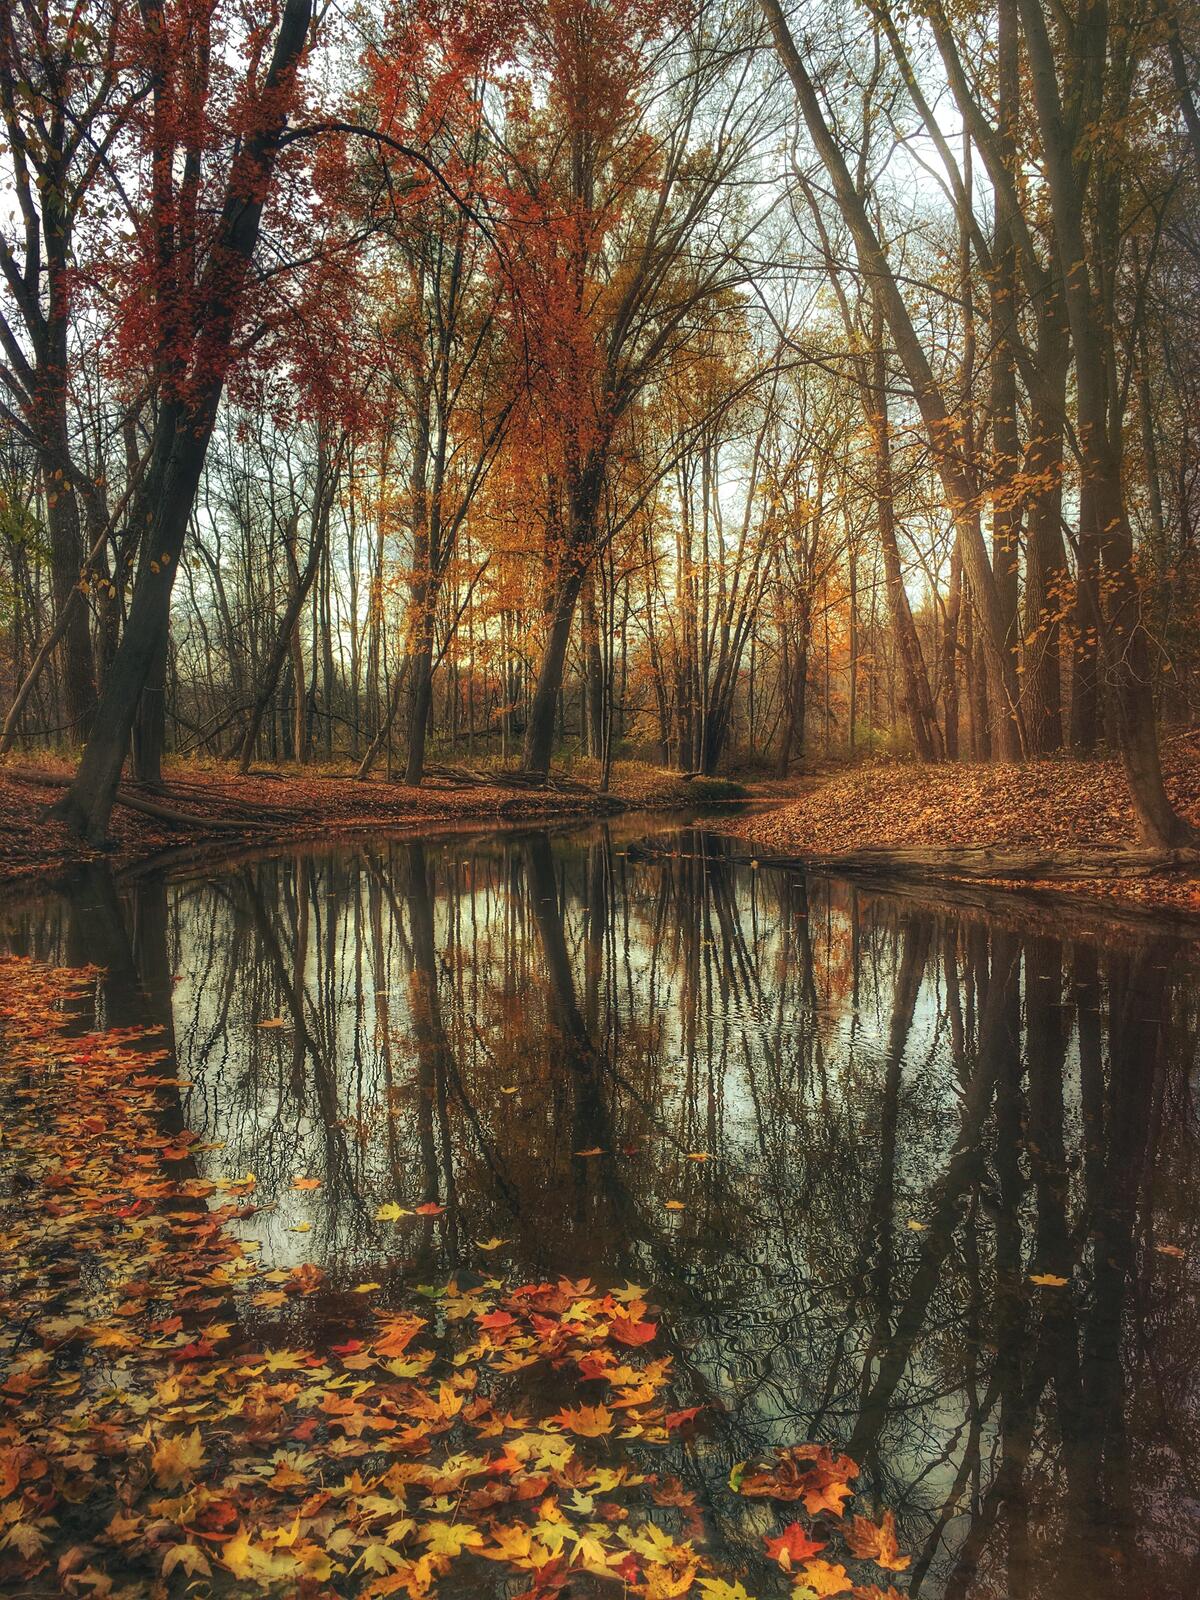 The banks of the river are strewn with fallen leaves of yellow color